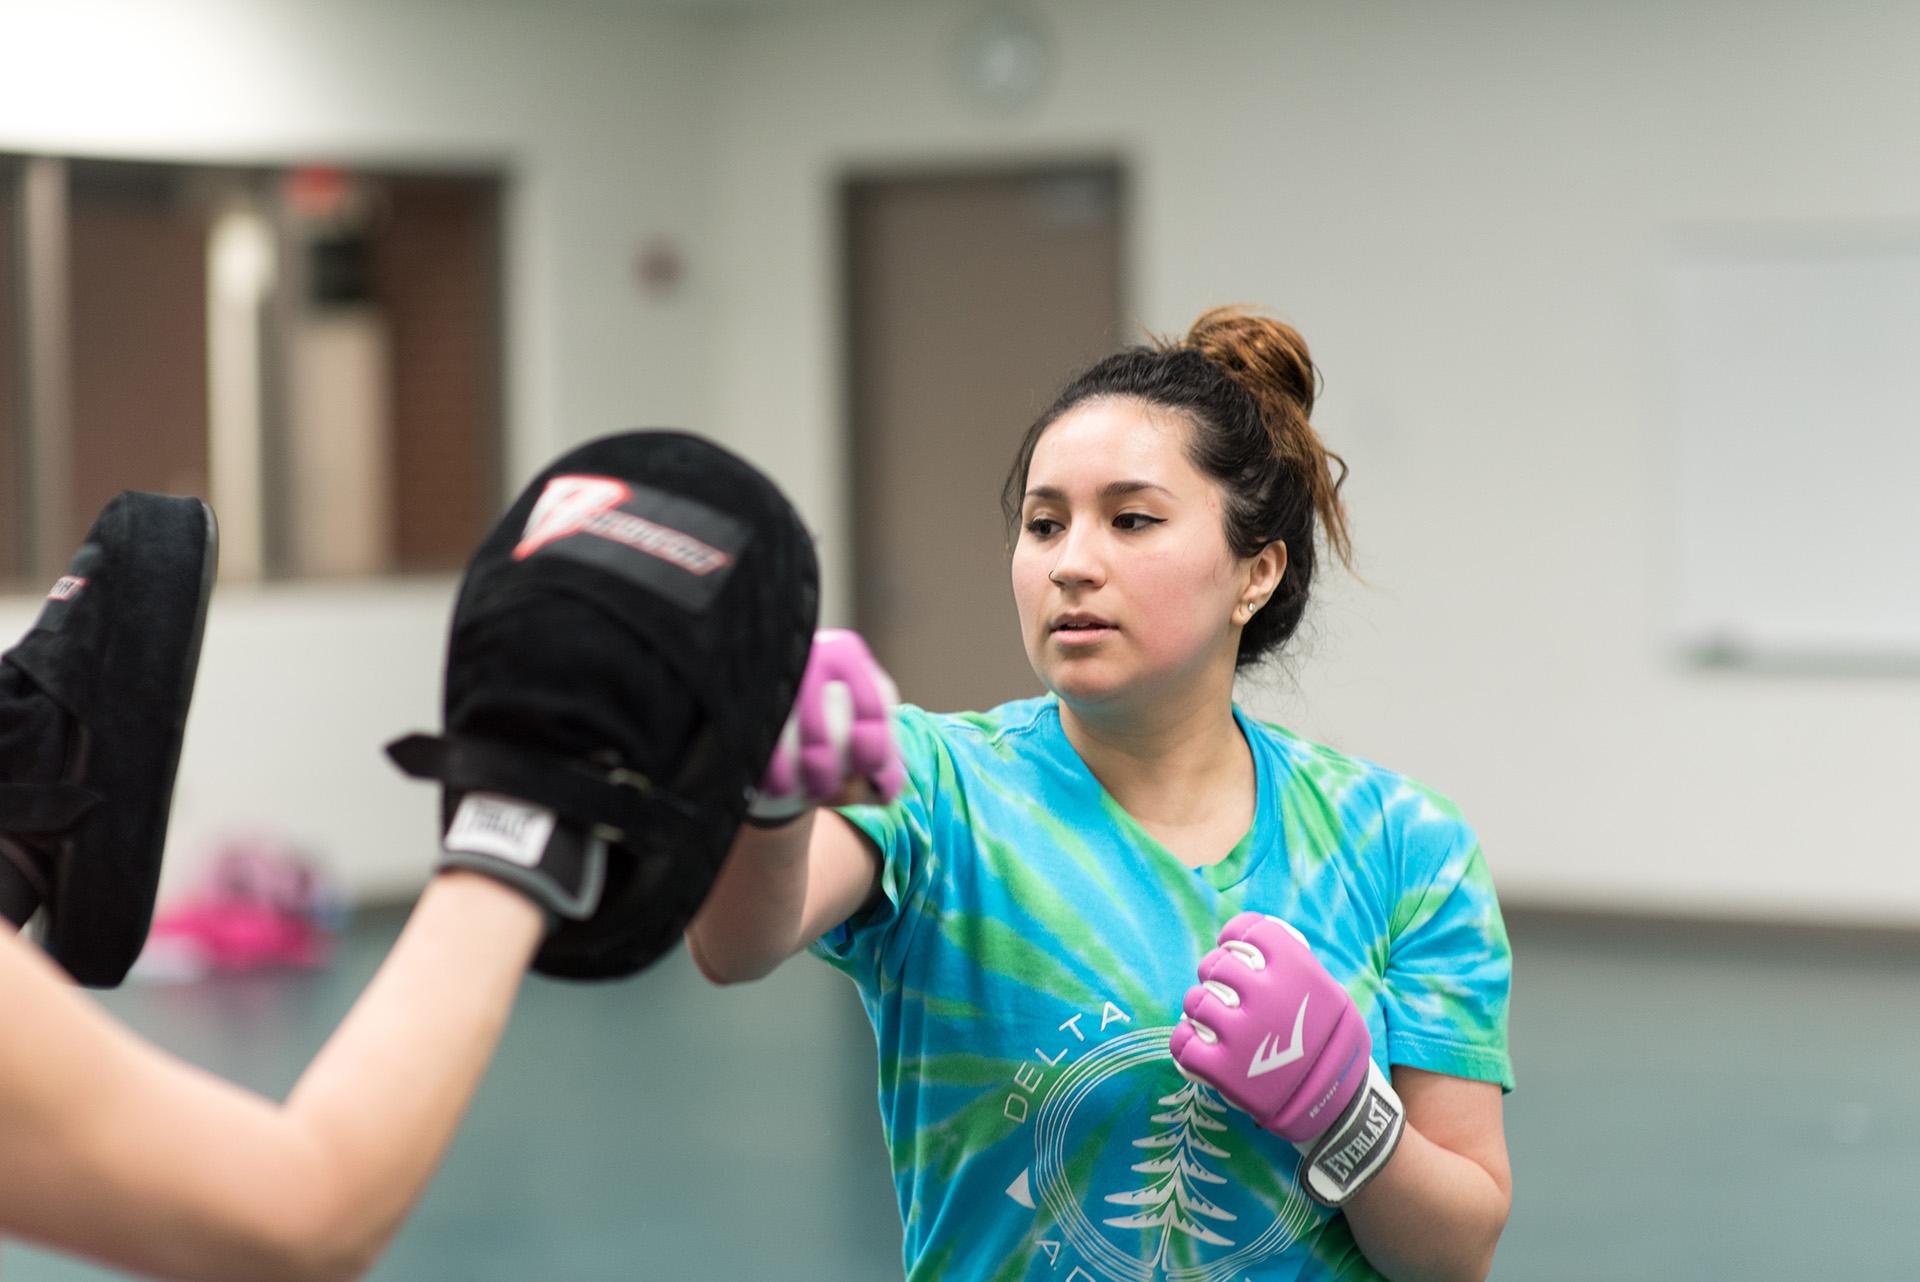 Group classes are offered, including a kickboxing class.